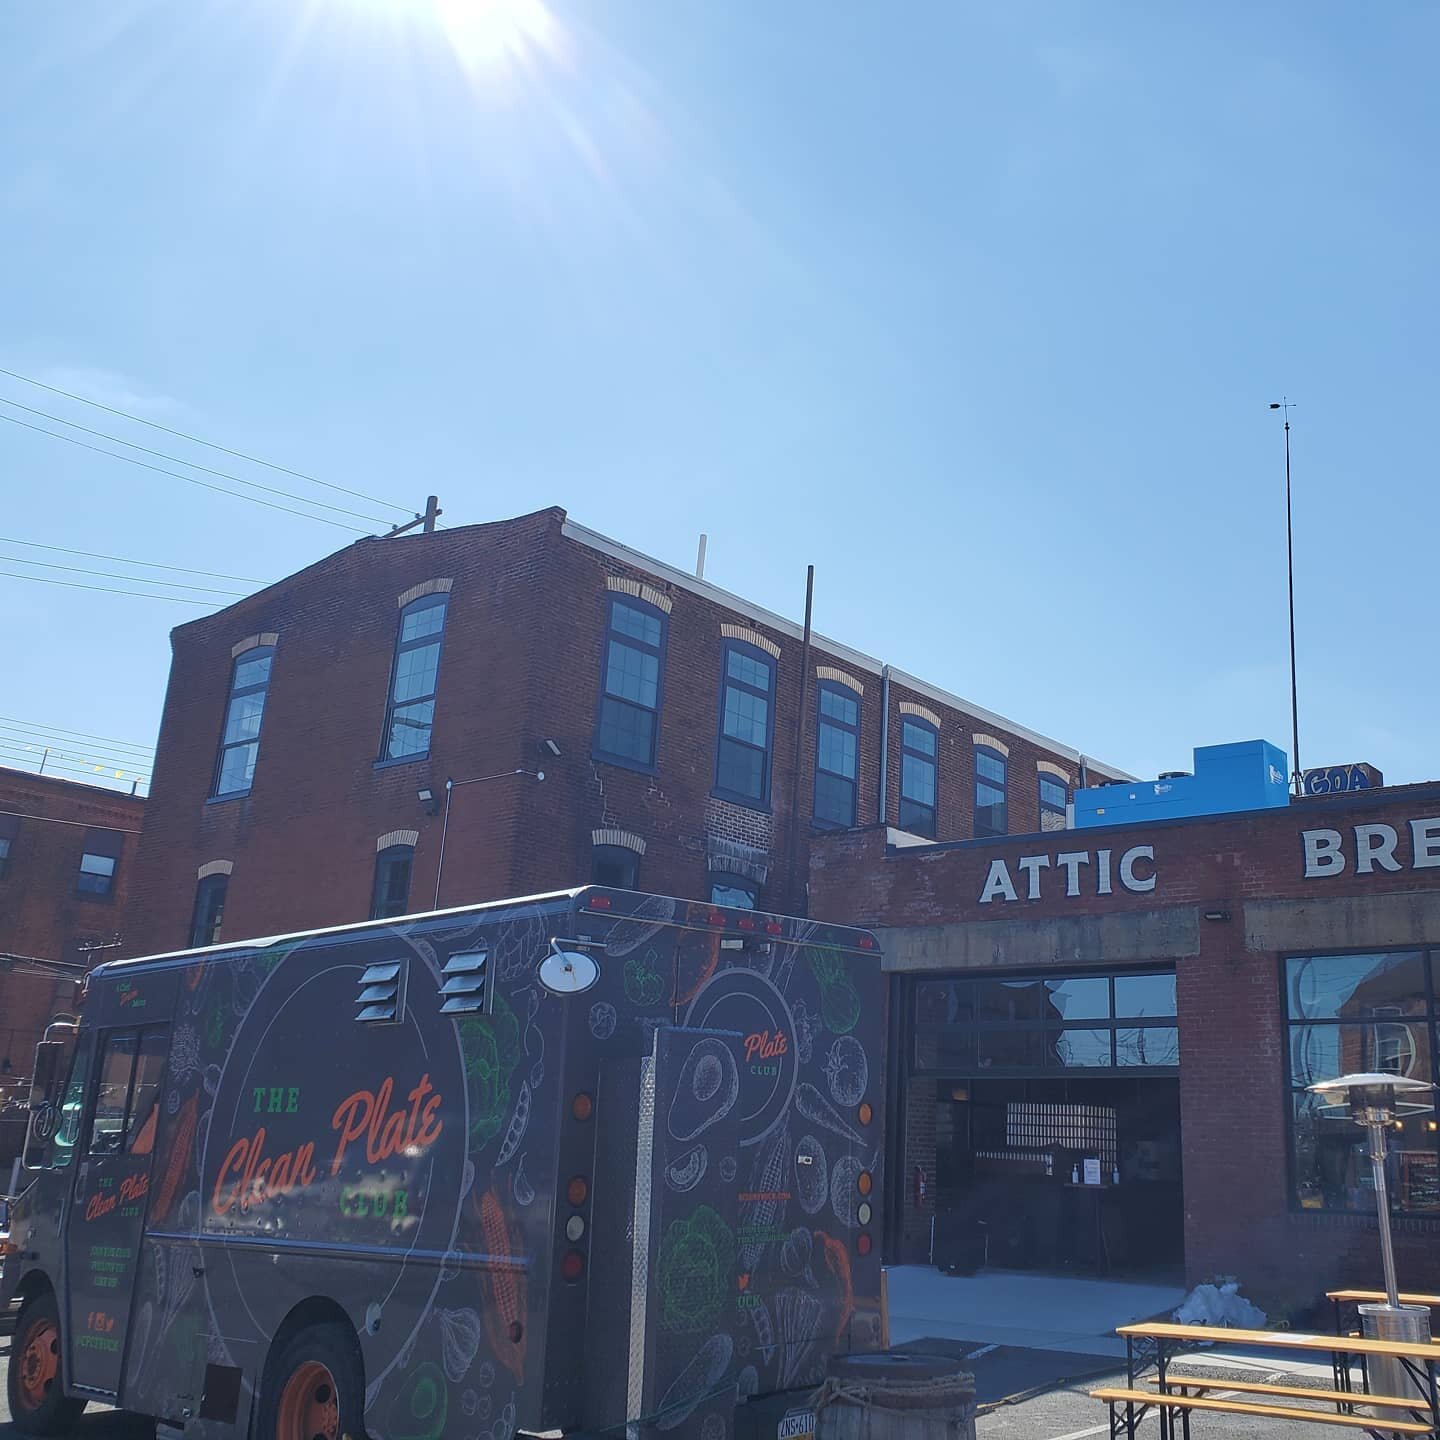 It's  a beautiful day!

Come spend it with us if you'd  like @atticbrewing . 

If not, just make sure you enjoy it wherever  you are!